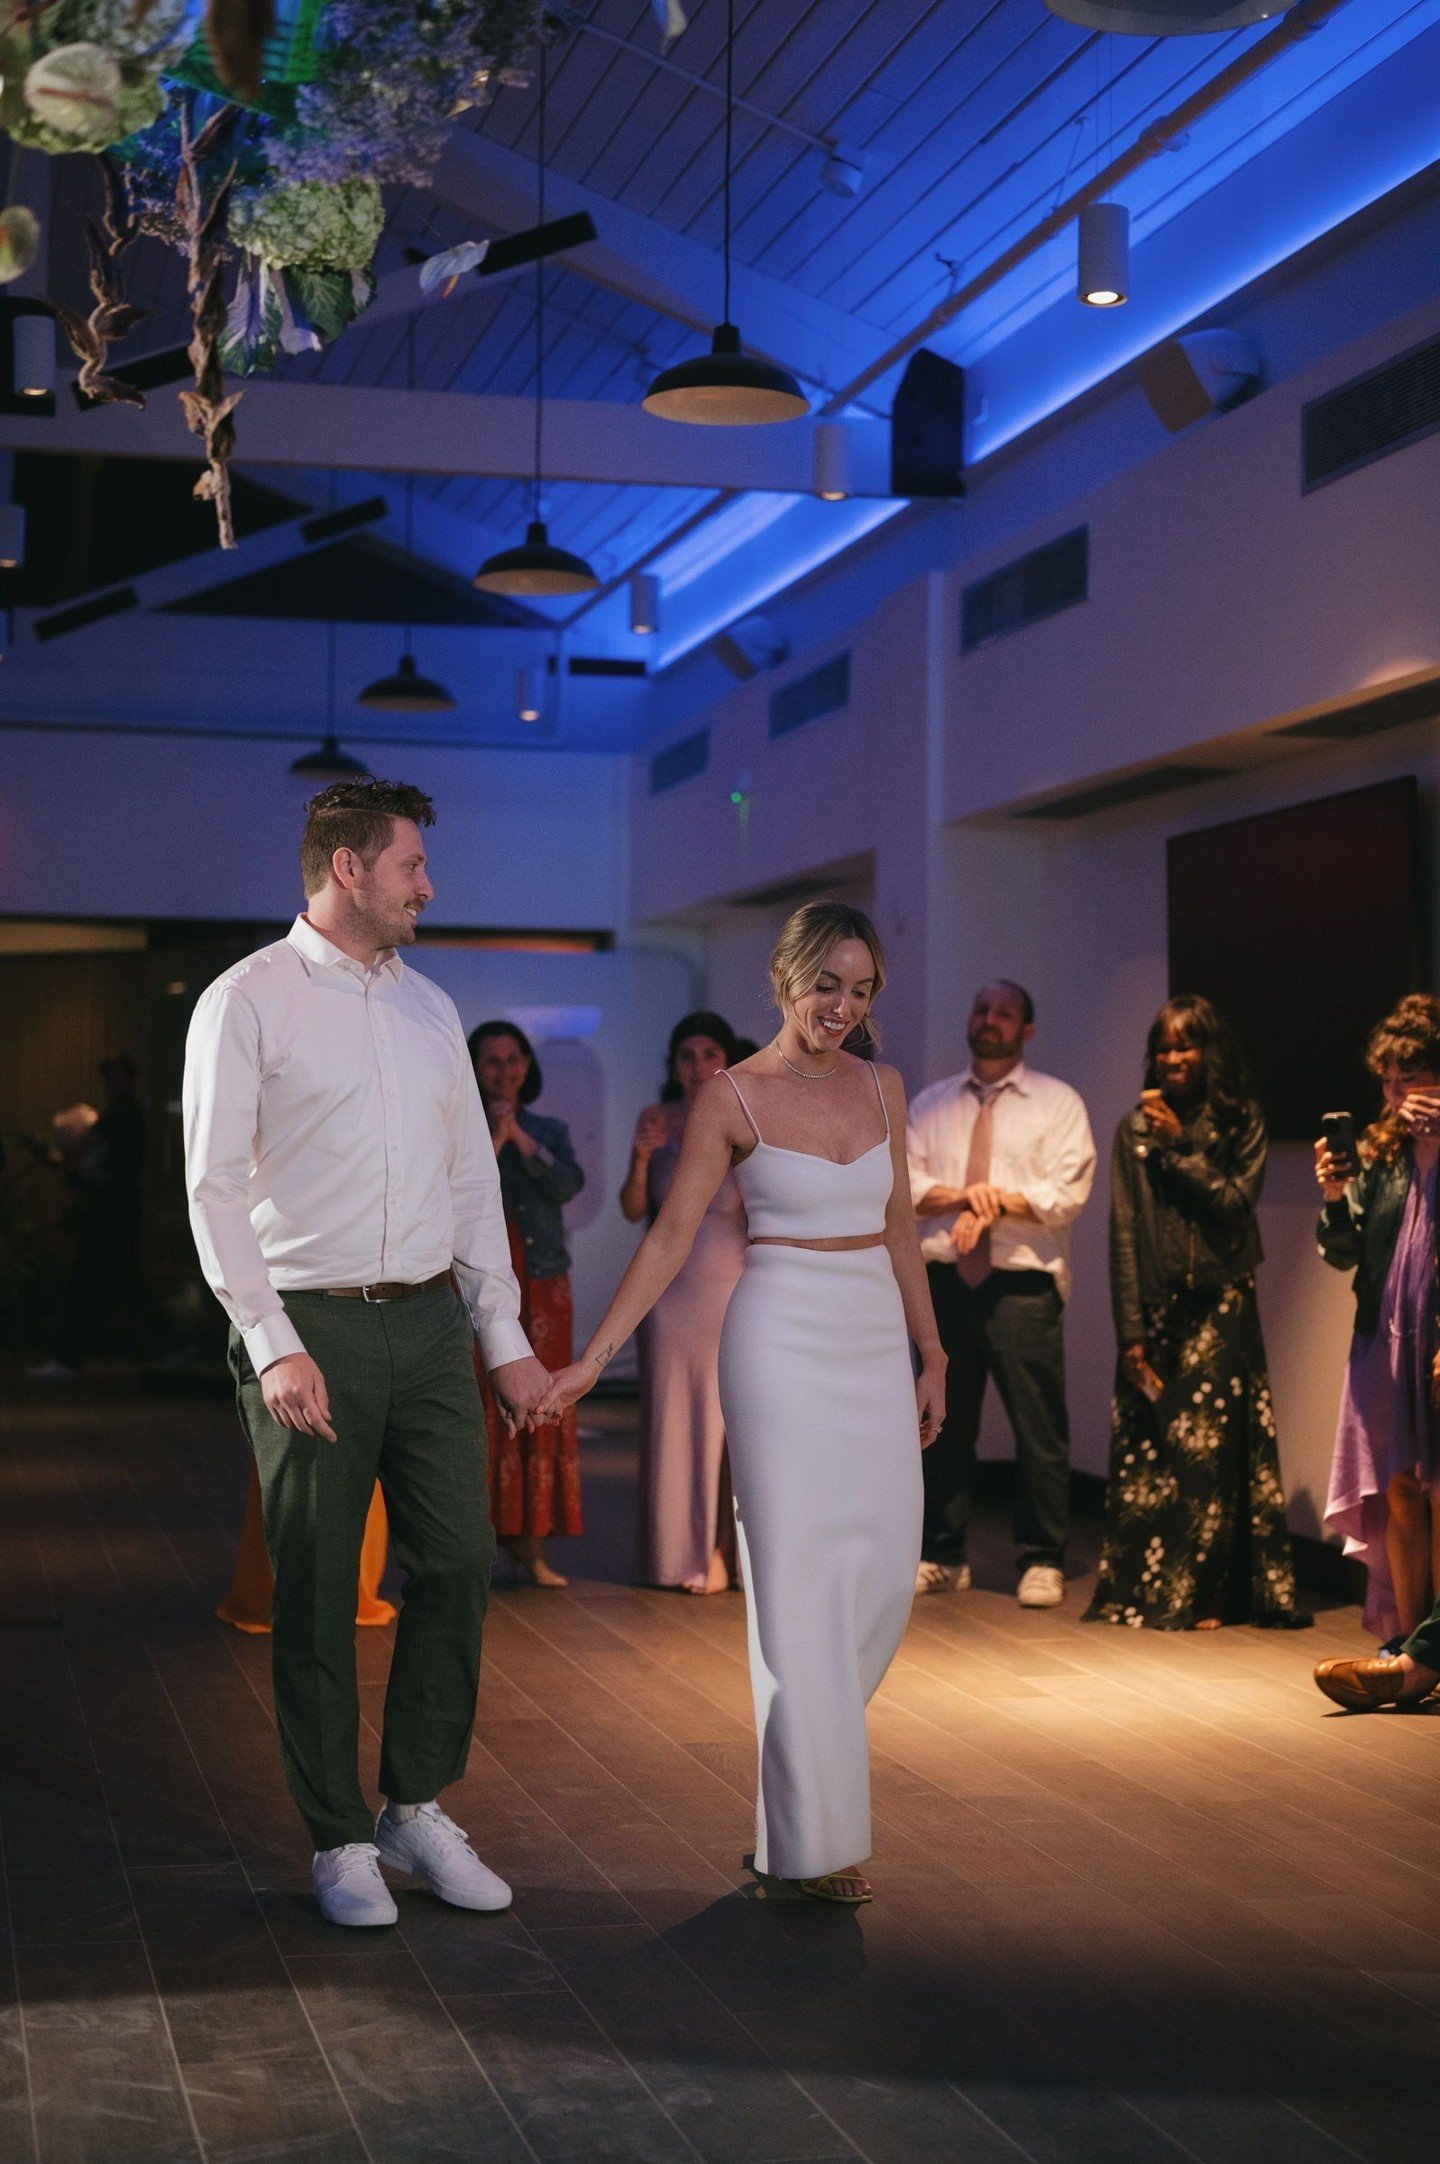 I love it when couples have a choreographed first dance.  @pnwweddingdance did a fantastic job and these two executed it perfectly!⁣
⁣
⁣
⁣
Captured while seconding for @casiyostphoto⁣
⁣
Planning @kayloebridal⁣
Videographer @emmak_films⁣
Florist @nove